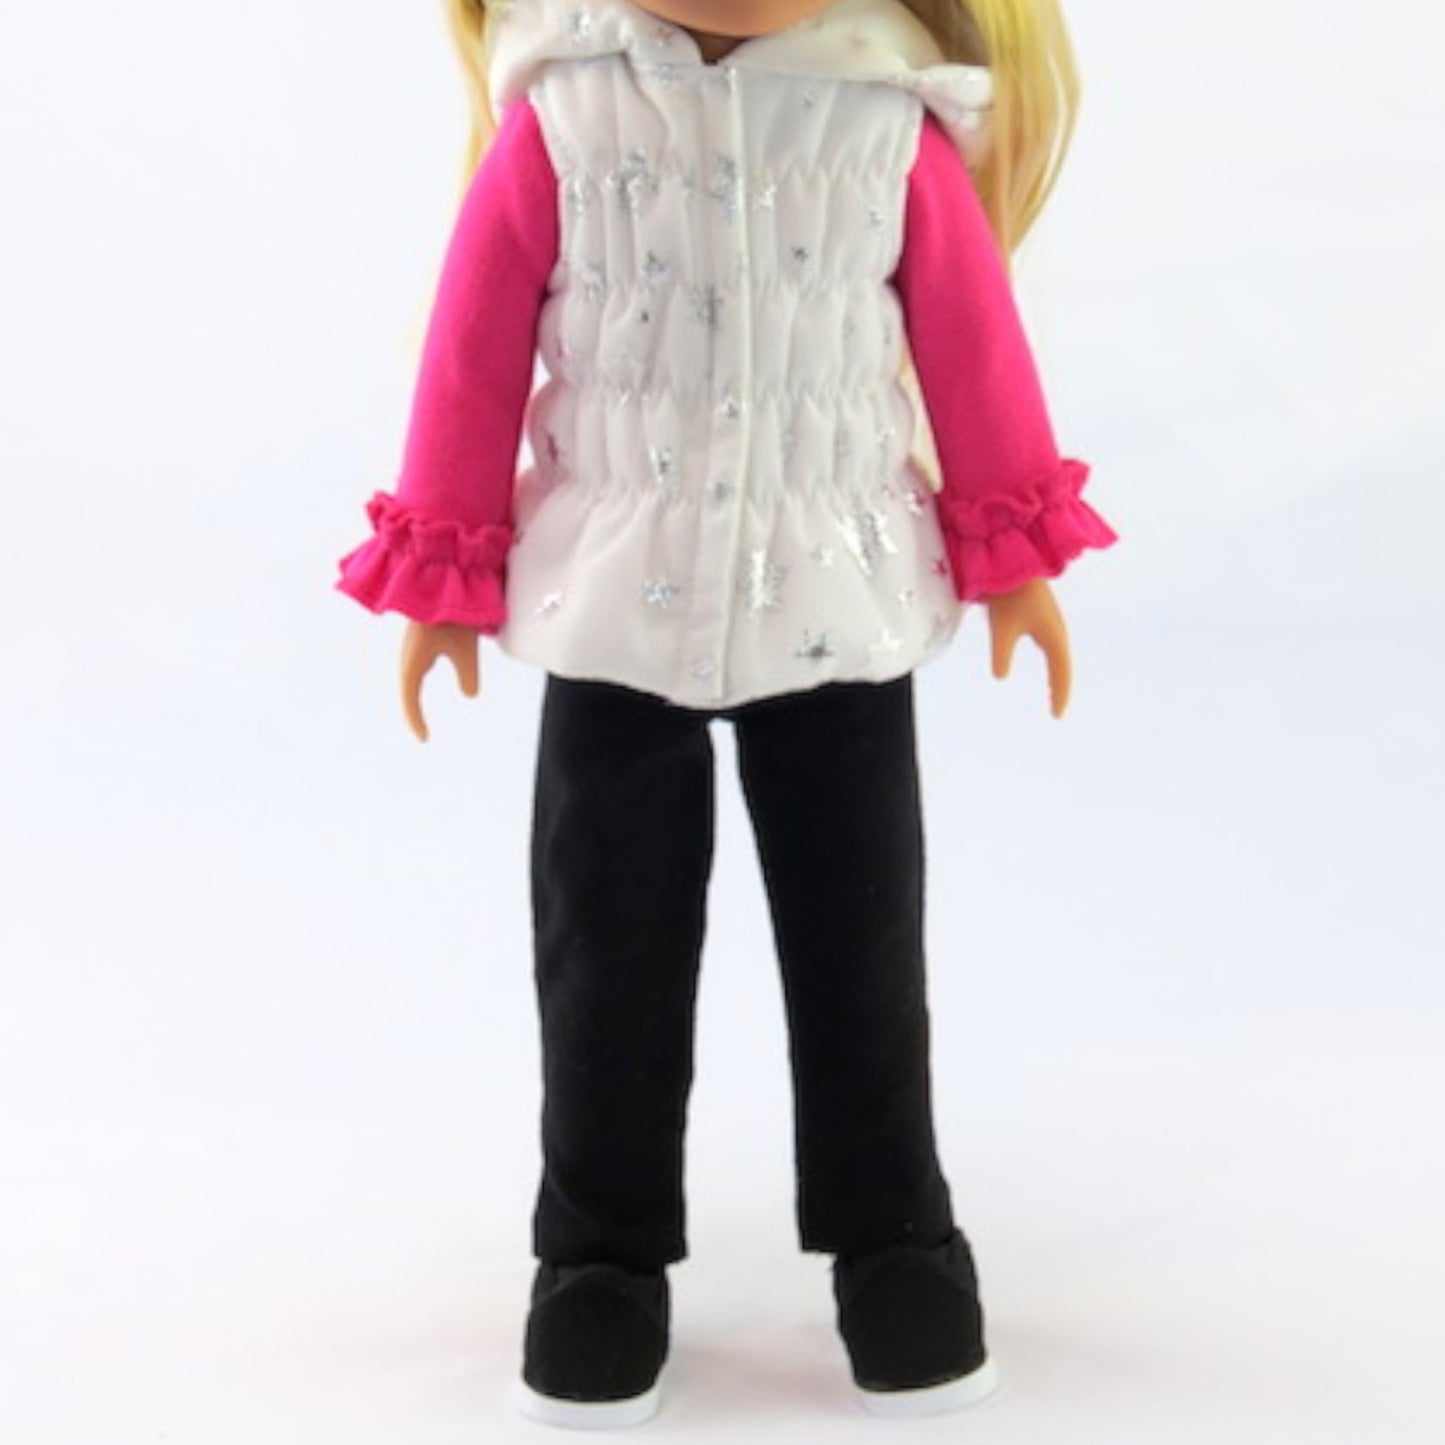 Hot Pink, Black, and White Puffer Vest Pant Set for 14 1/2-inch dolls with doll